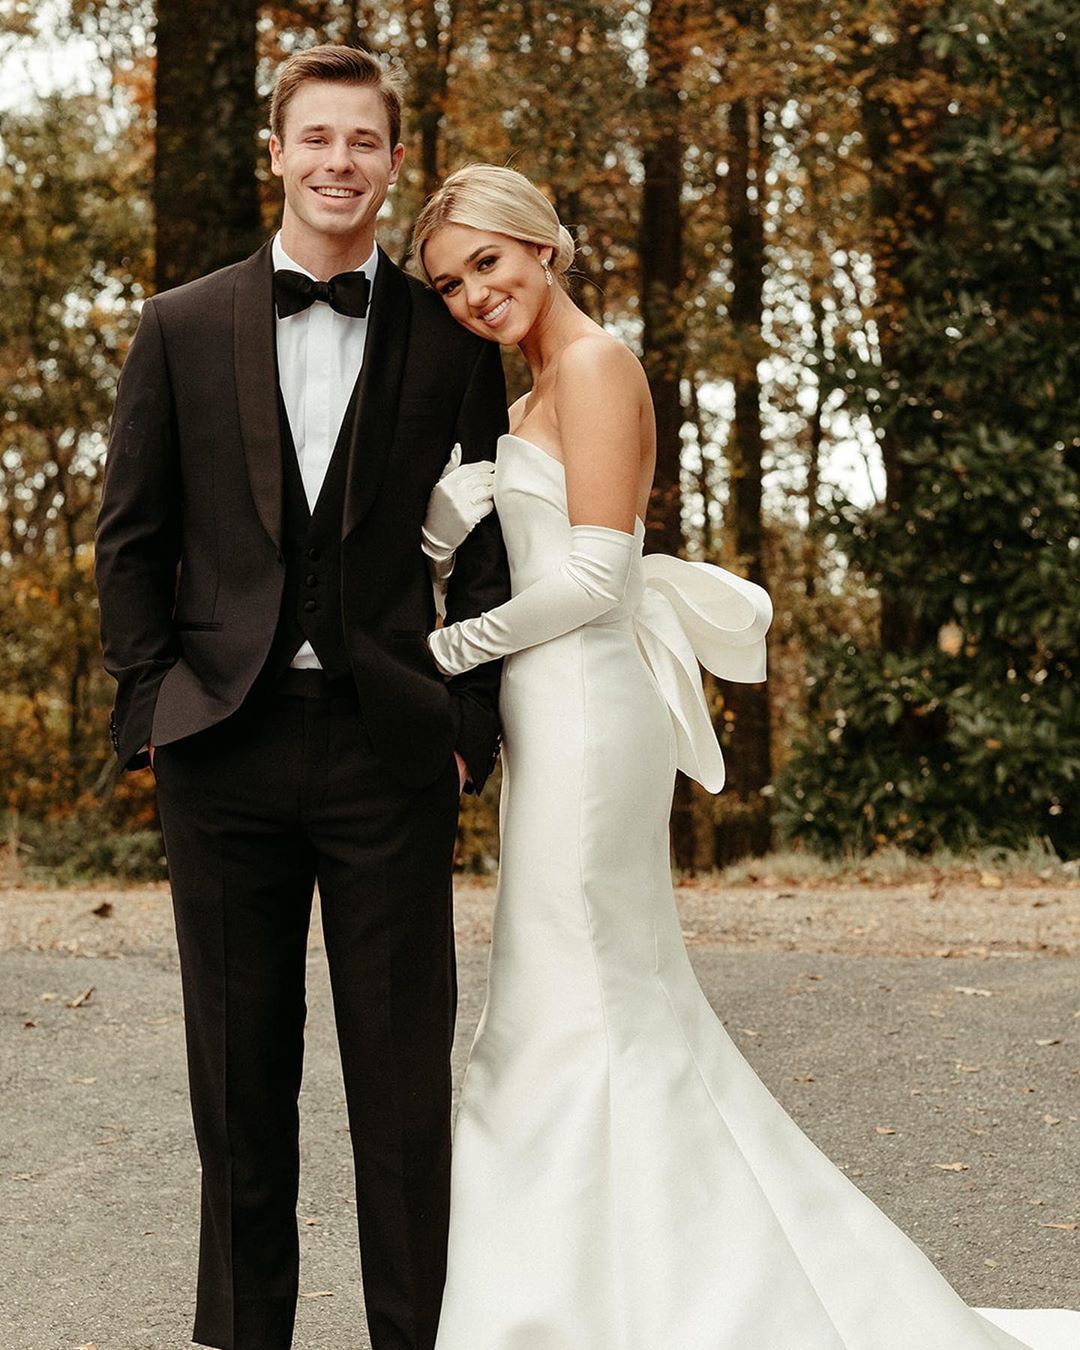 Korie Robertson on Instagram: “I'm still not quite able to put it into words, but just know that on 11.25.19 our baby girl married the most amazing man. These last few…” -   17 classic wedding Photos ideas